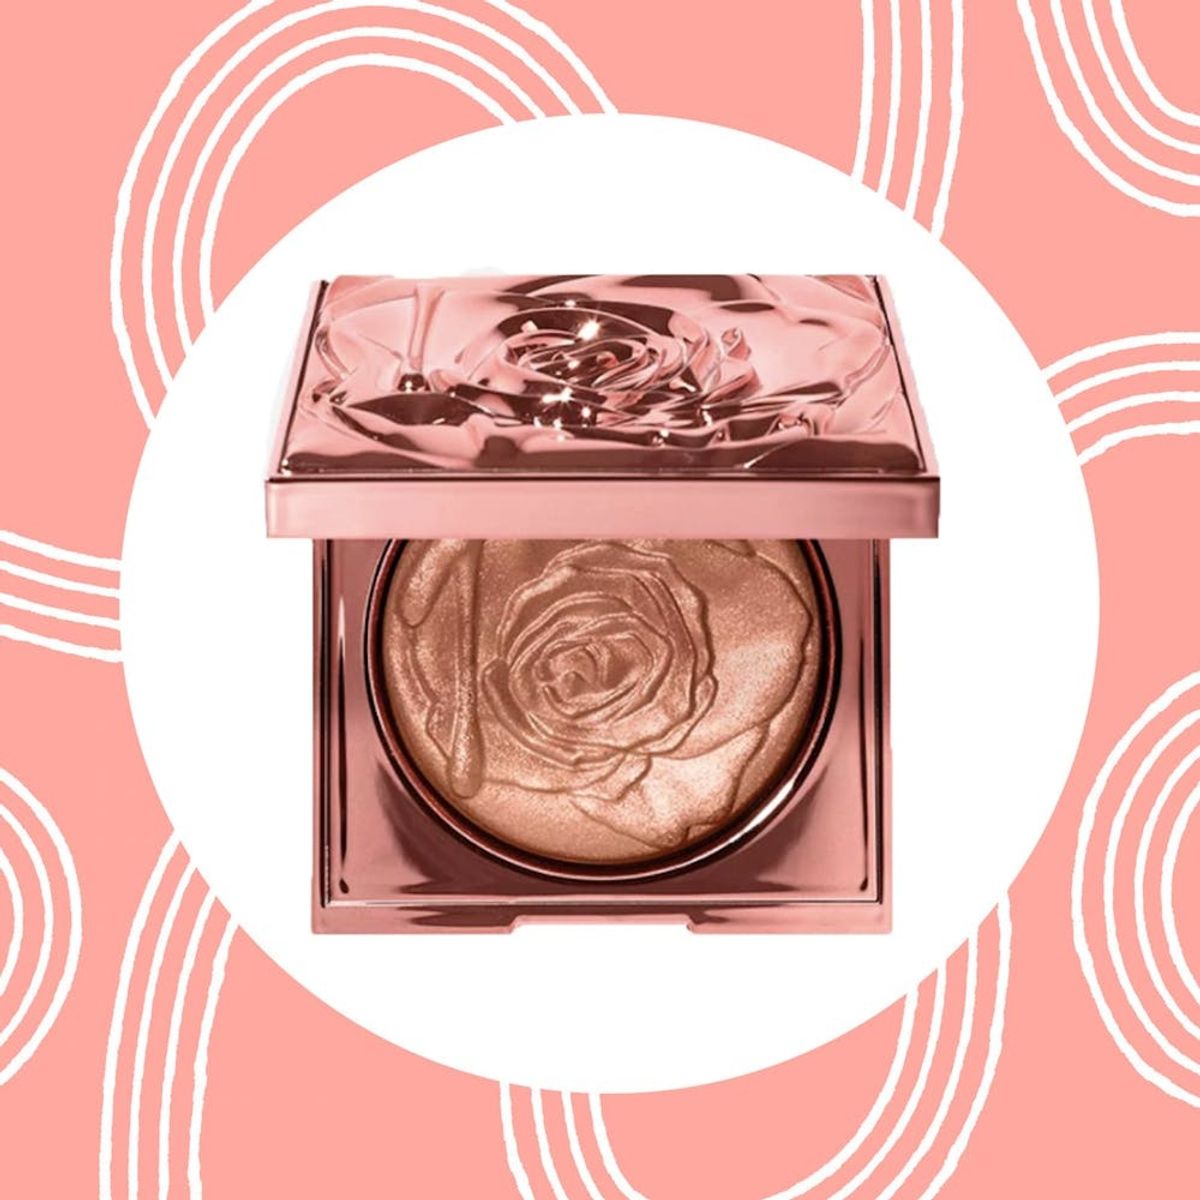 Smashbox Is Dropping the Rose Gold Makeup Collection of Your Dreams